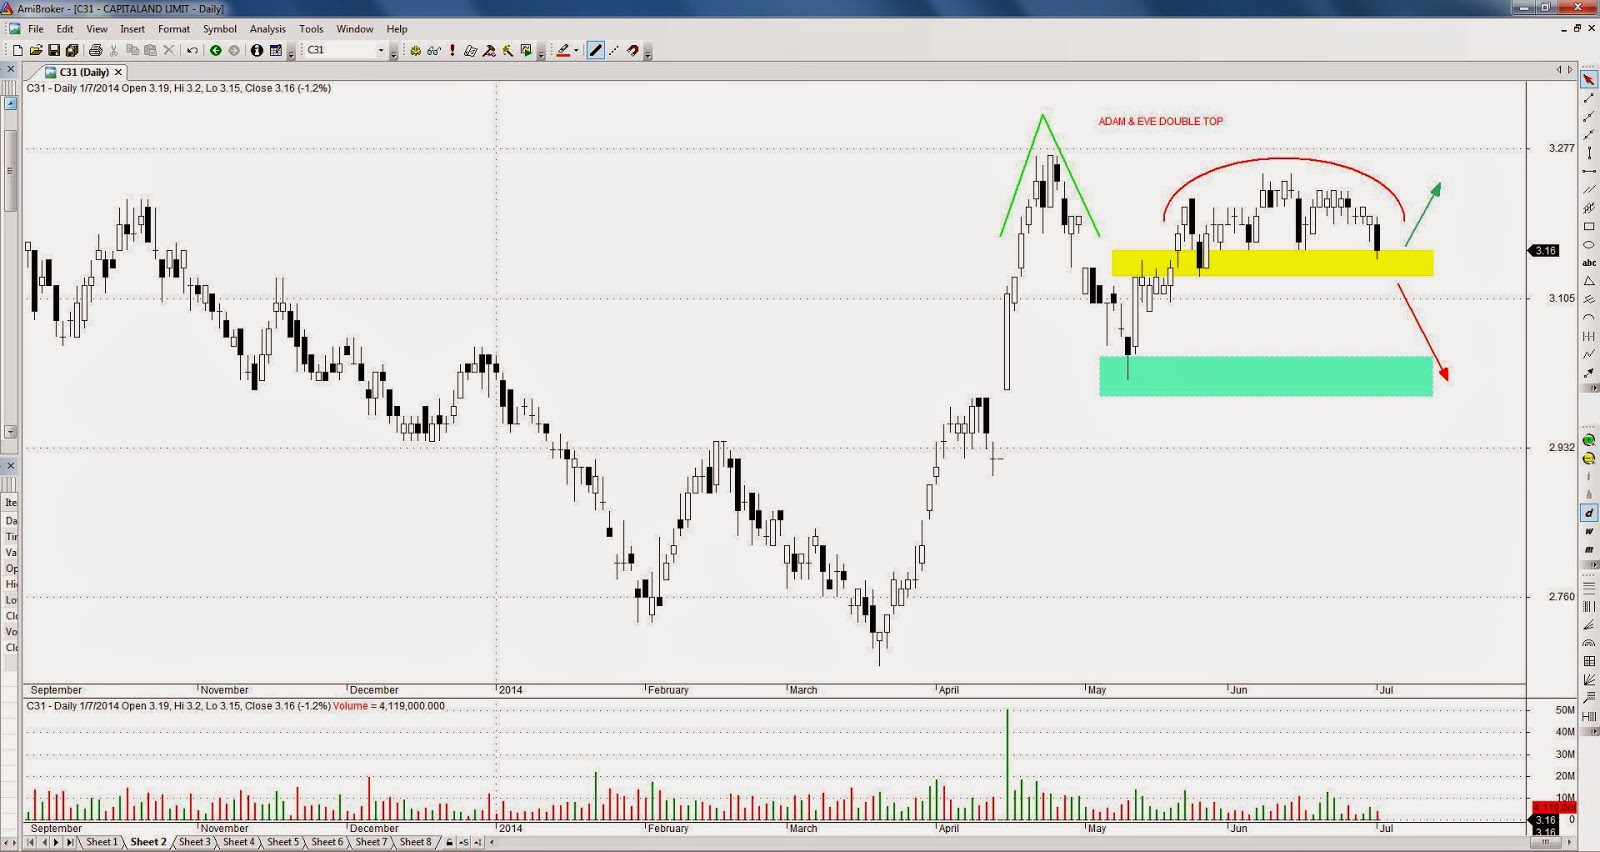 technical analysis chart training capitaland potential adam and eve double top